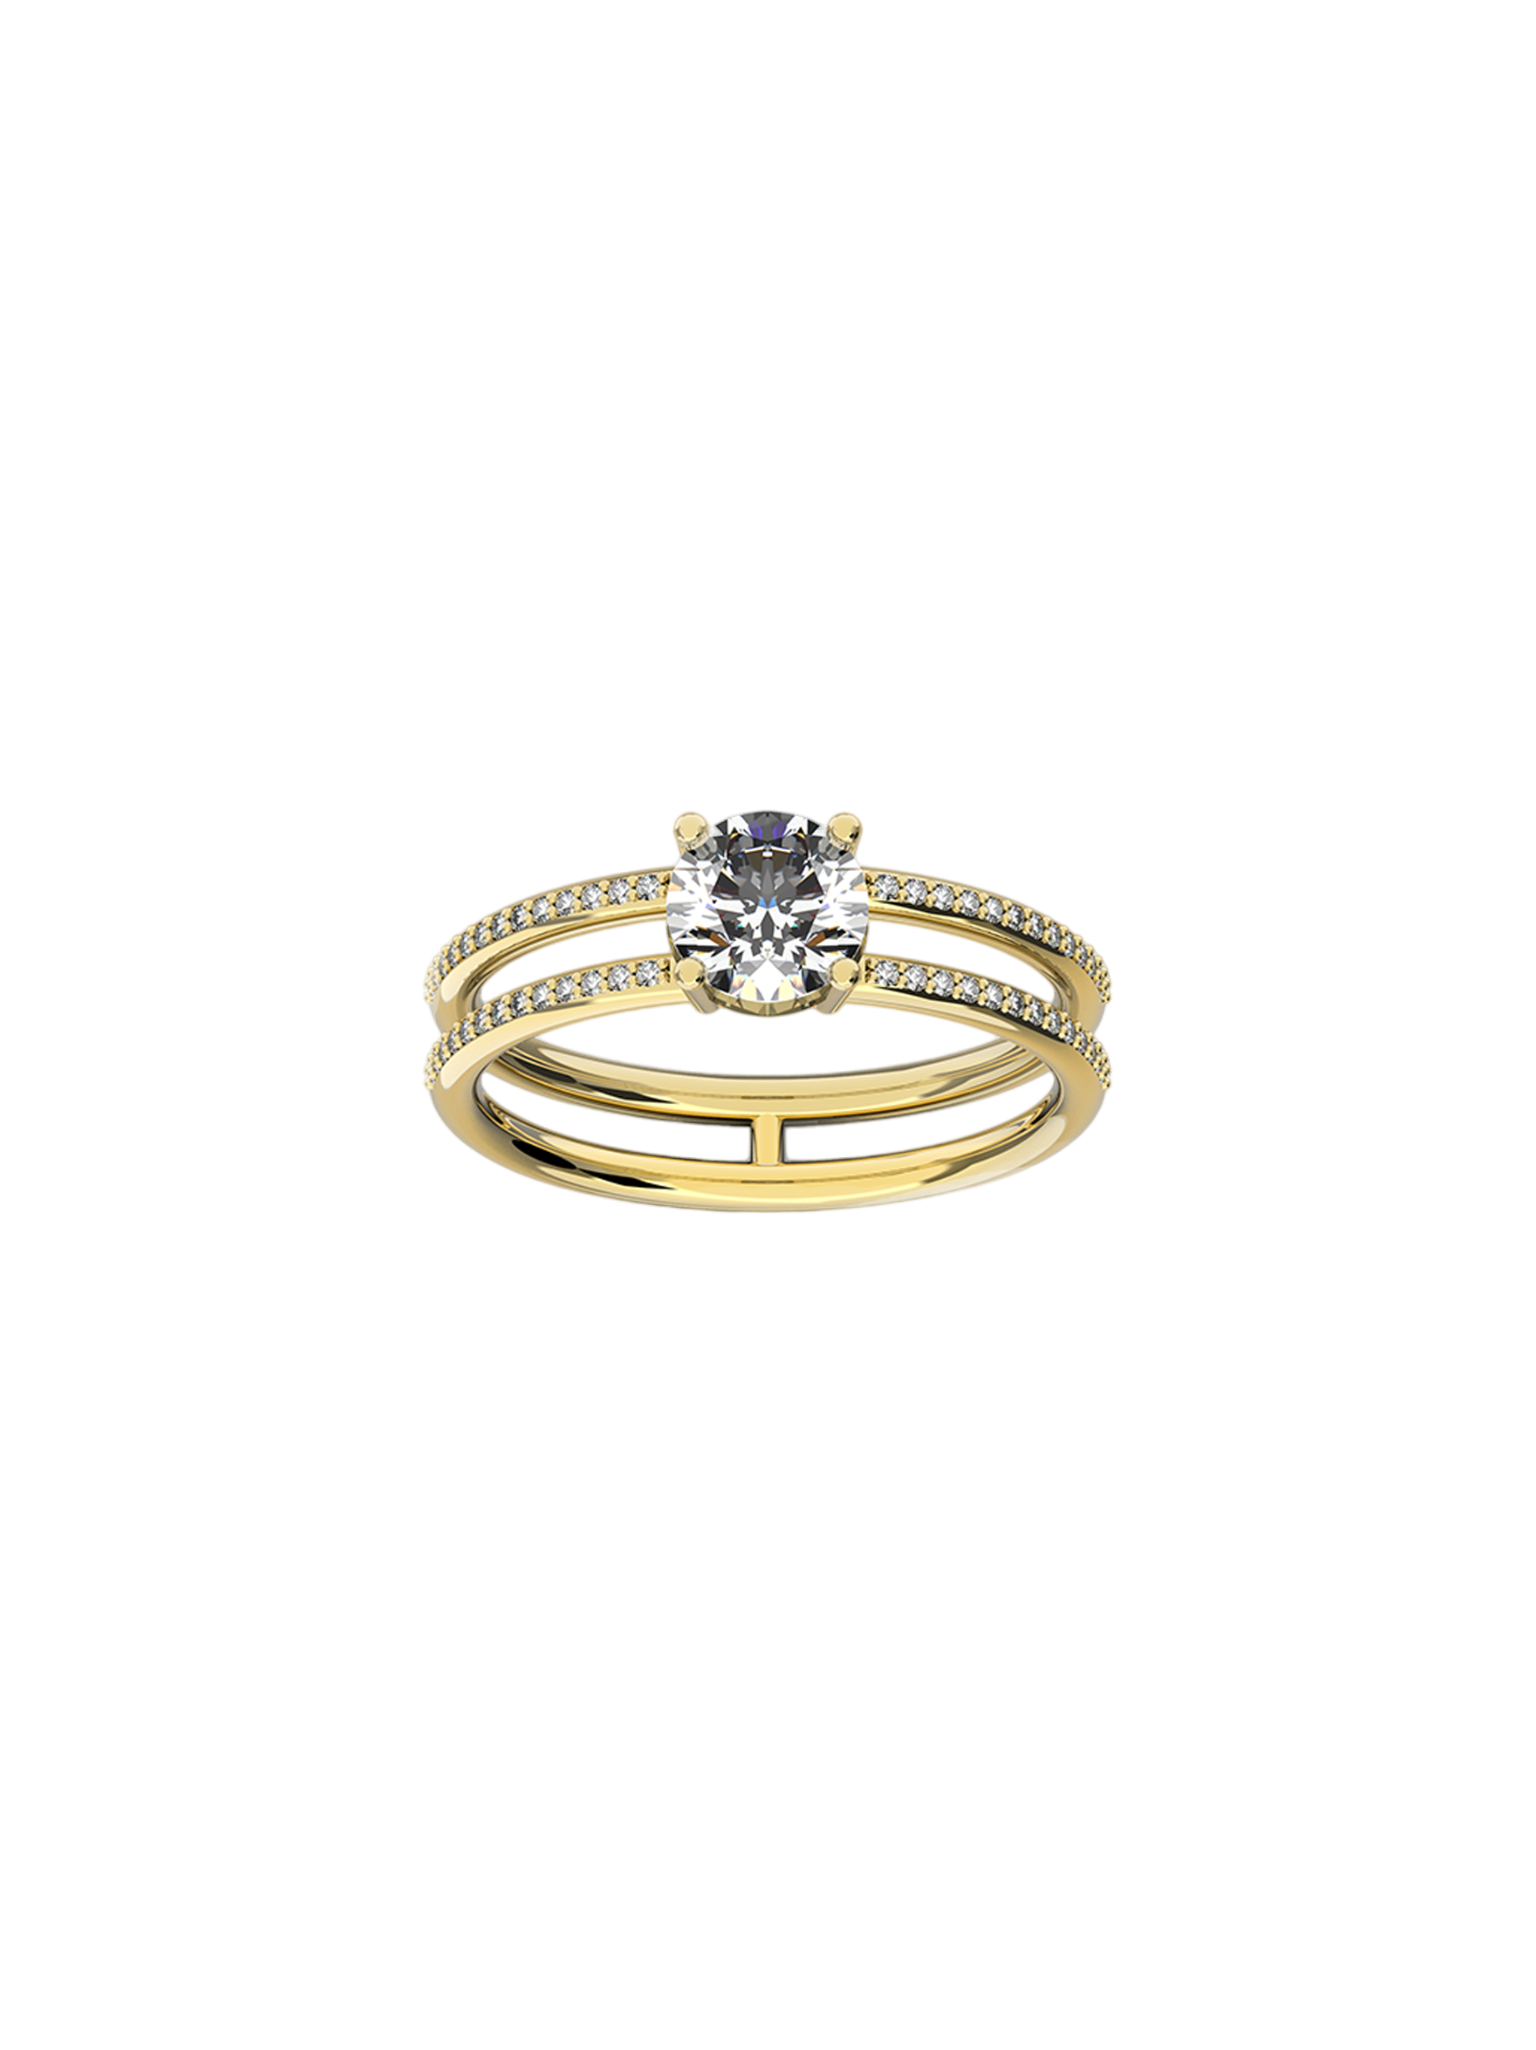 Double band pave ring 0.75 carat